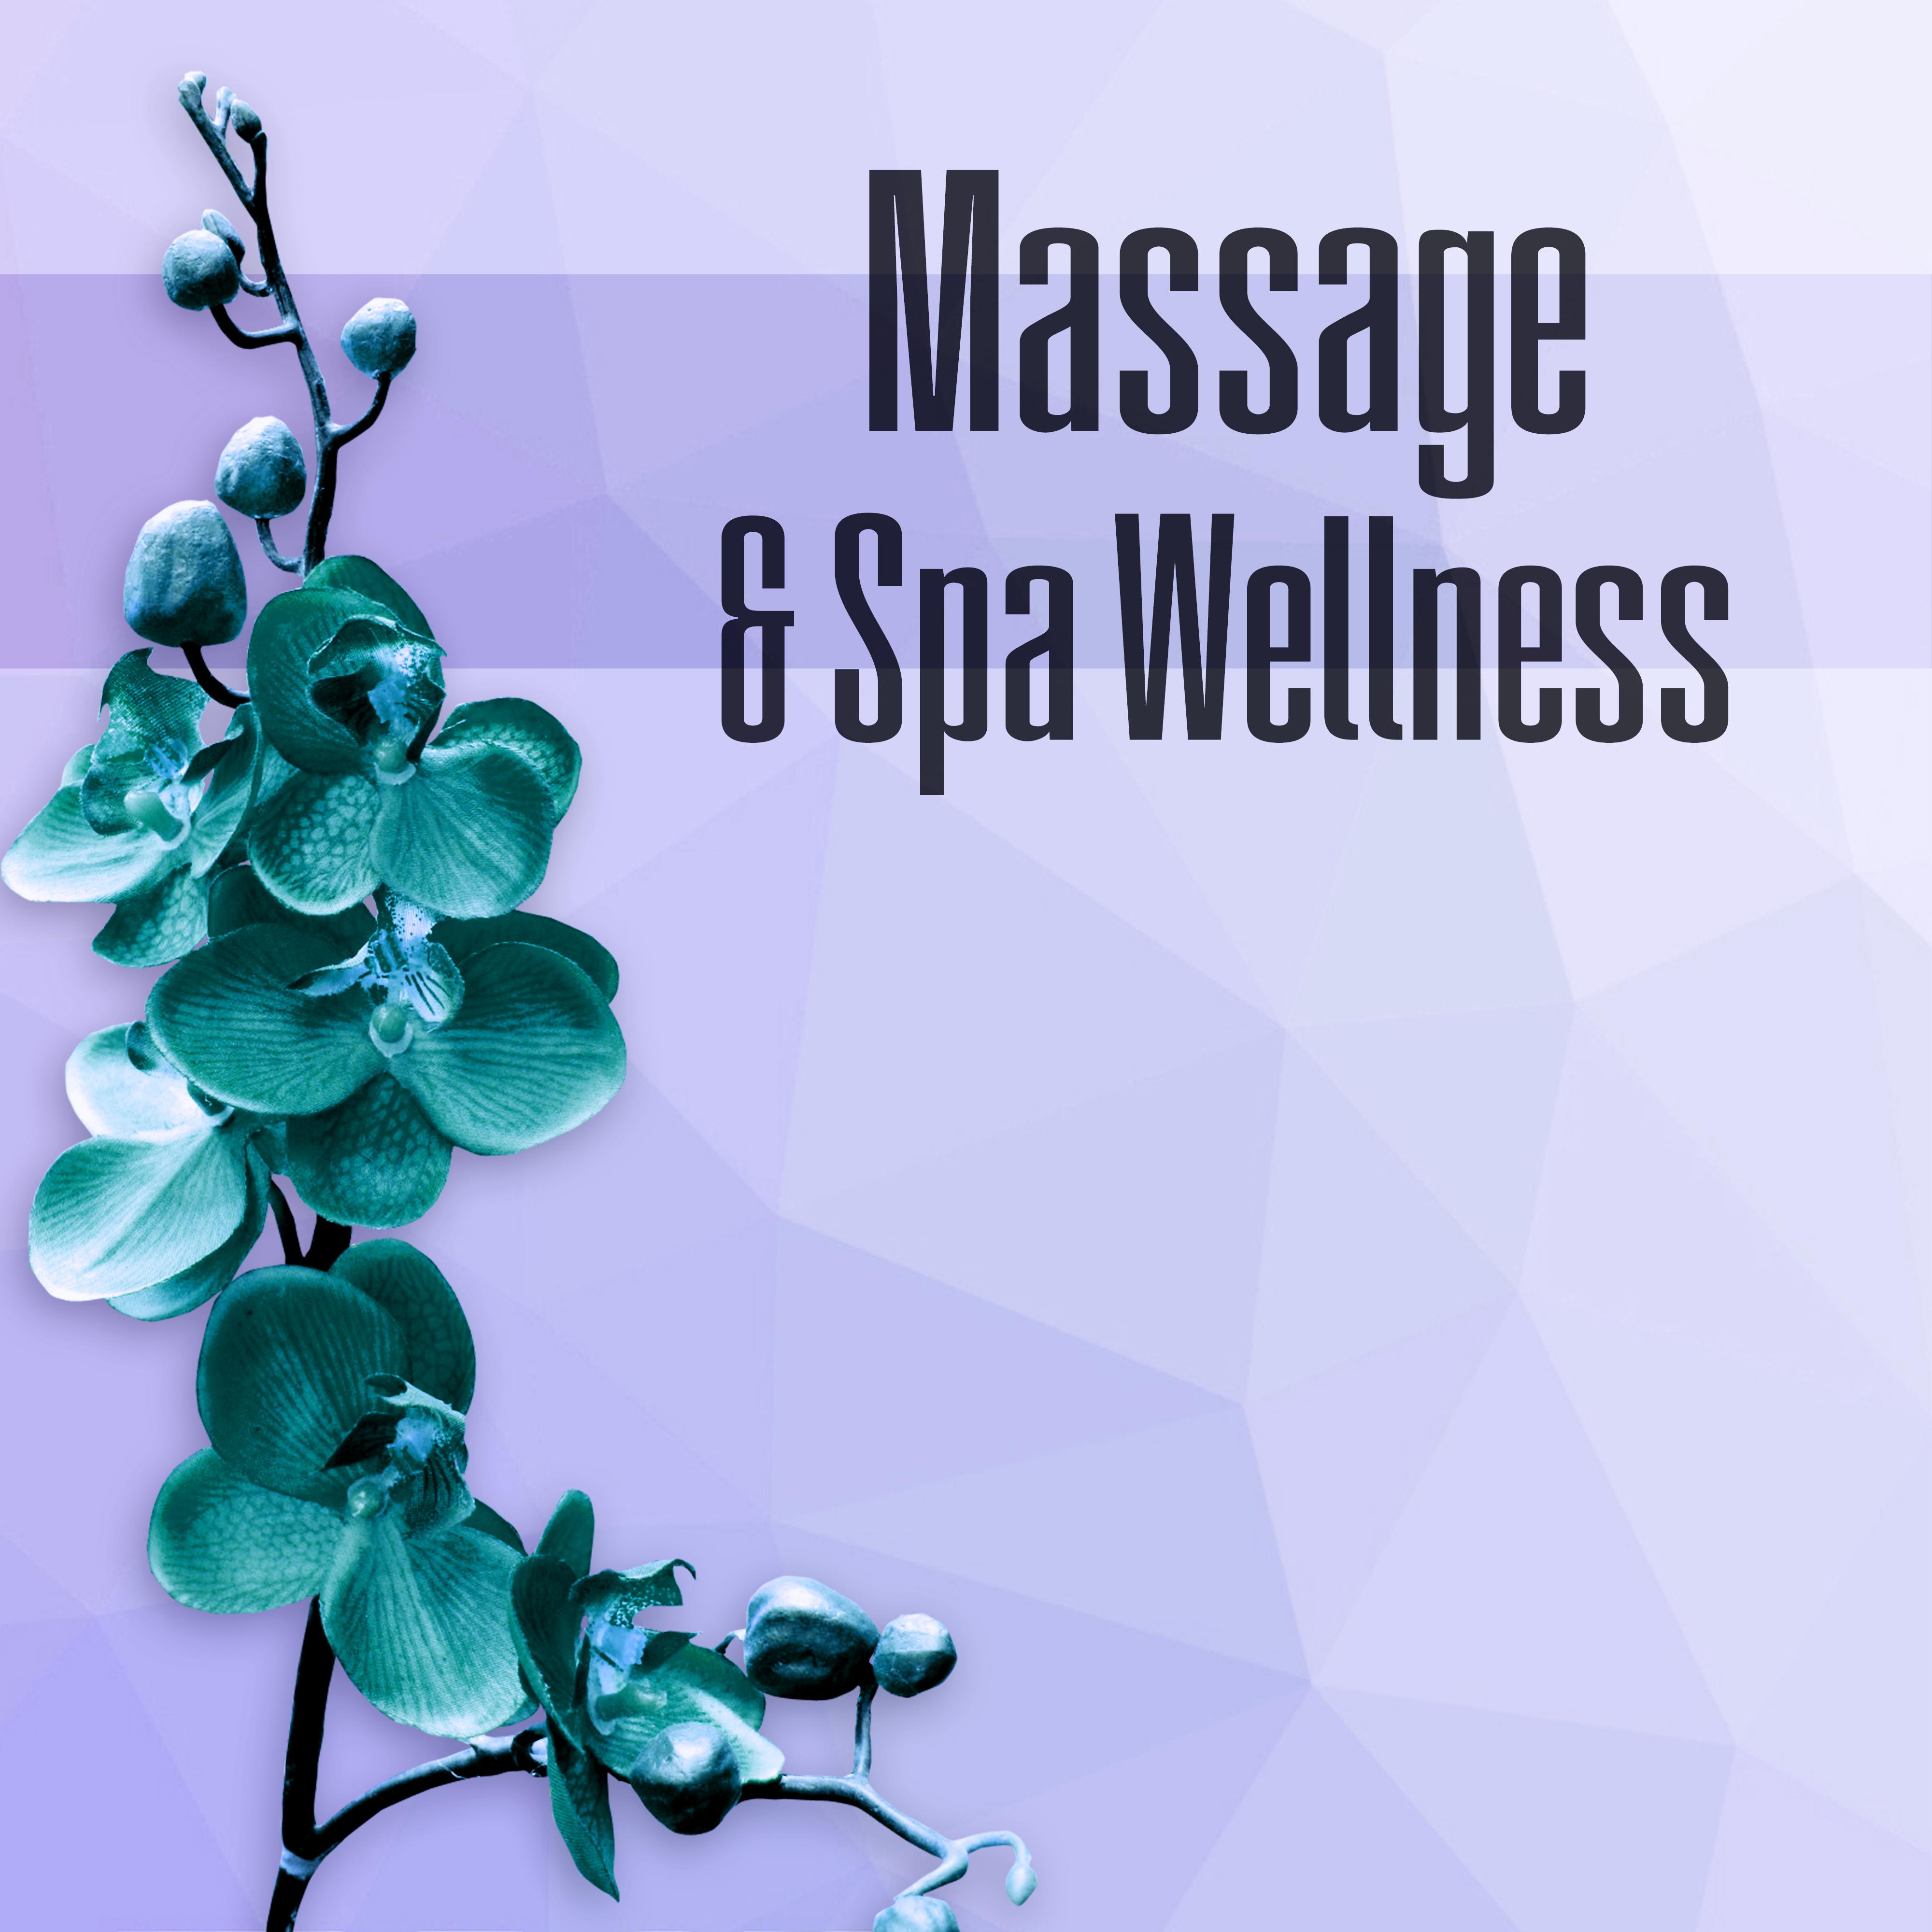 Massage & Spa Wellness - Music and Pure Nature Sounds for Stress Relief, Harmony of Senses, Relaxing Background Music for Spa the Wellness Center, Sensual Massage Music for Aromatherapy